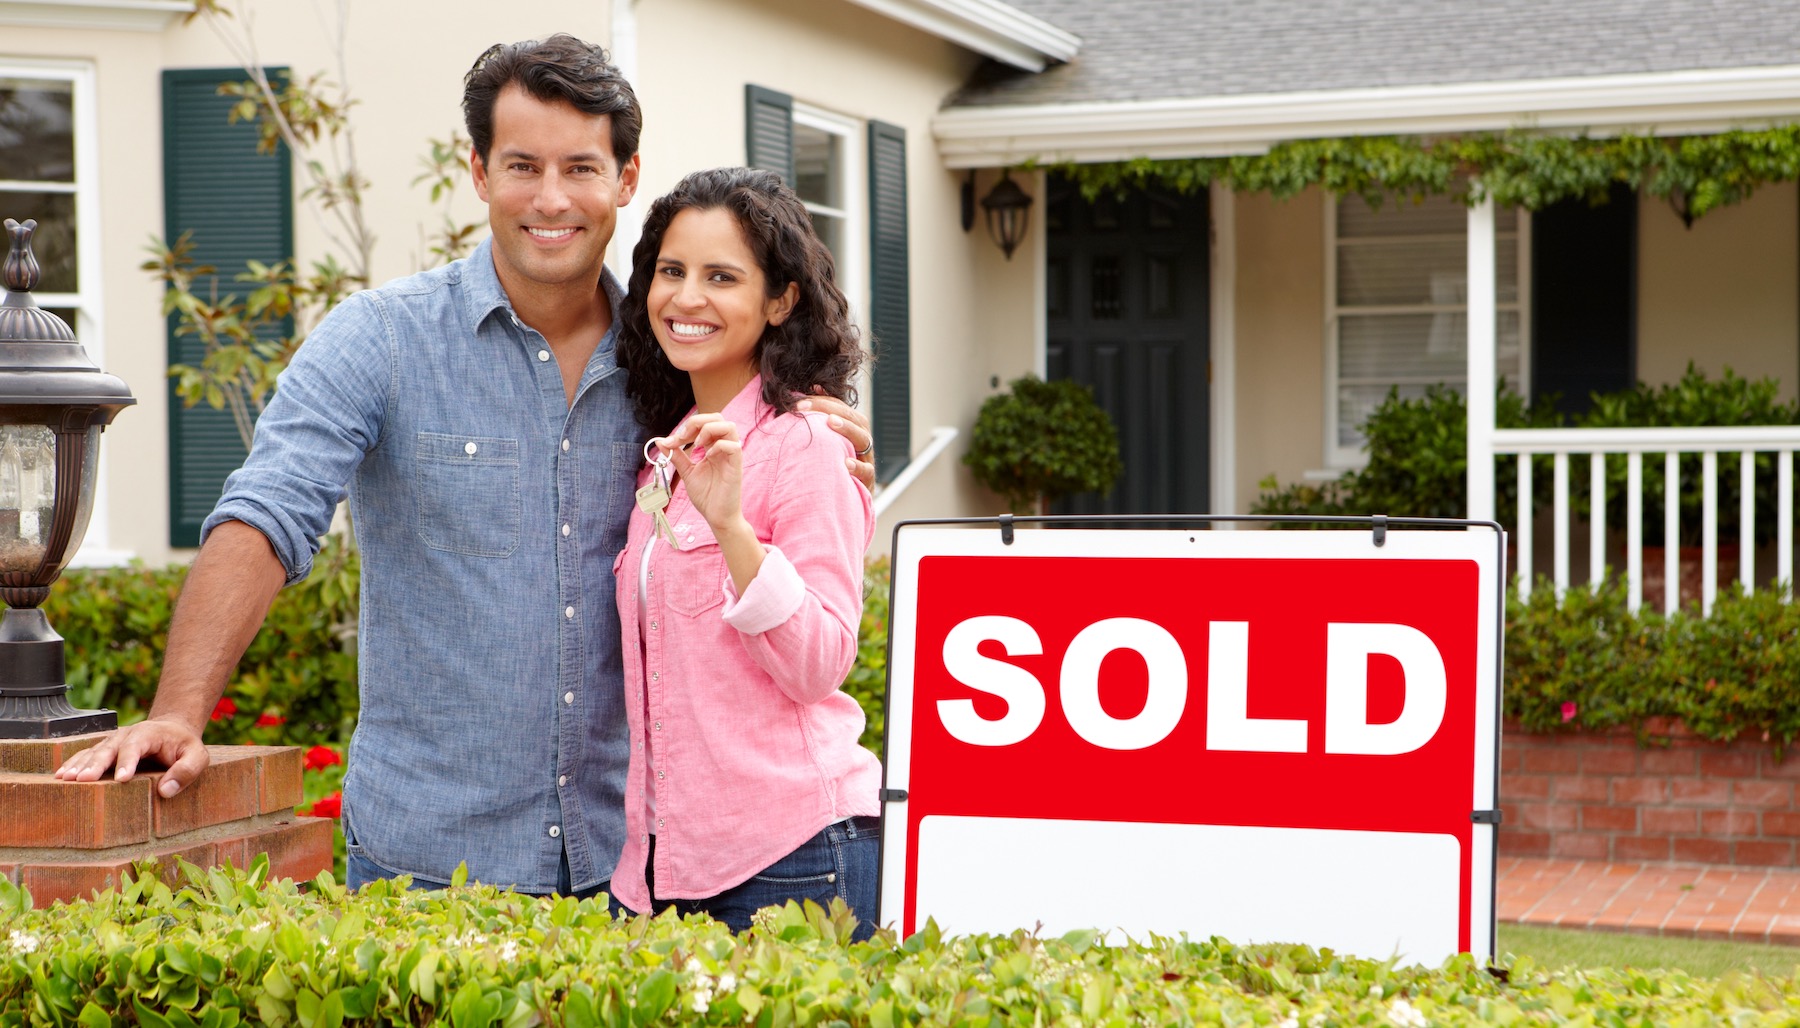 Some things about real estate supply and demand you might not have thought about